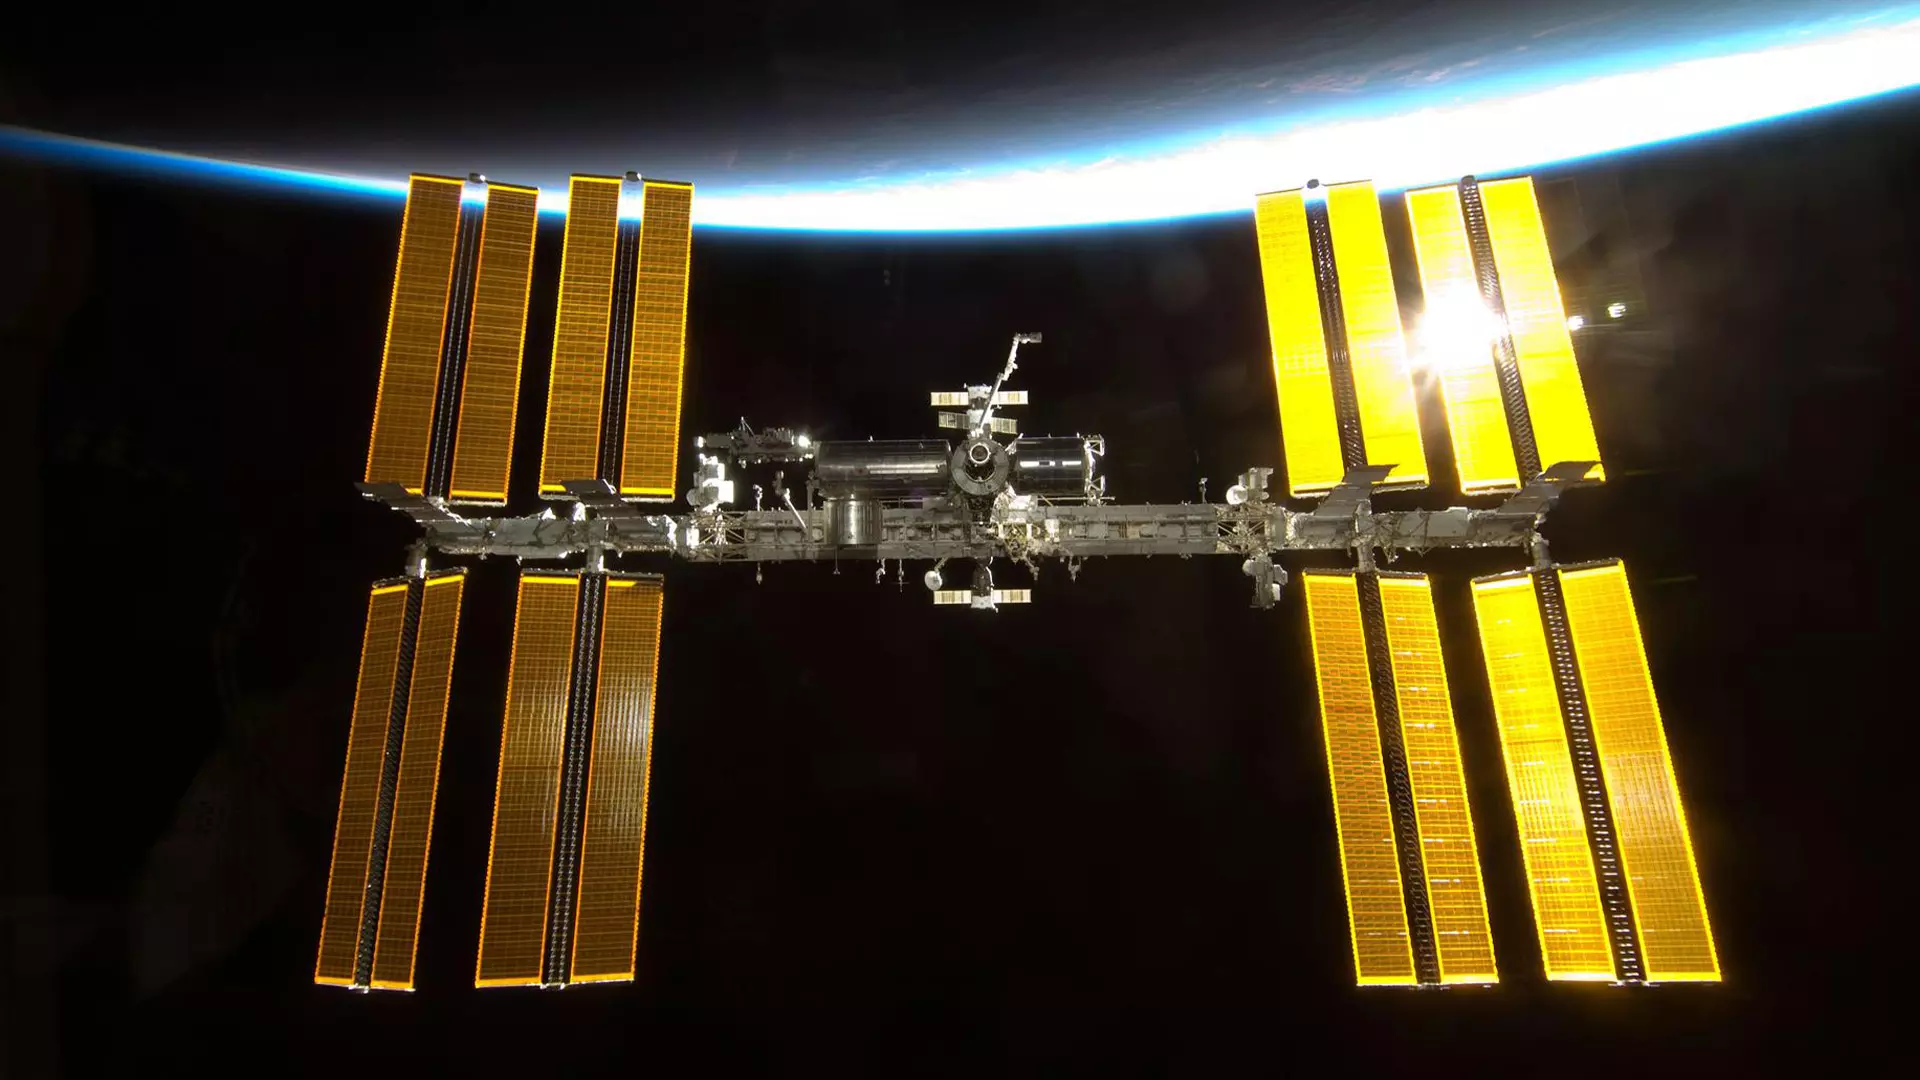 It takes ISS almost 90 minutes to circle the Earth once, a testament to our ability to conquer the vastness of space.